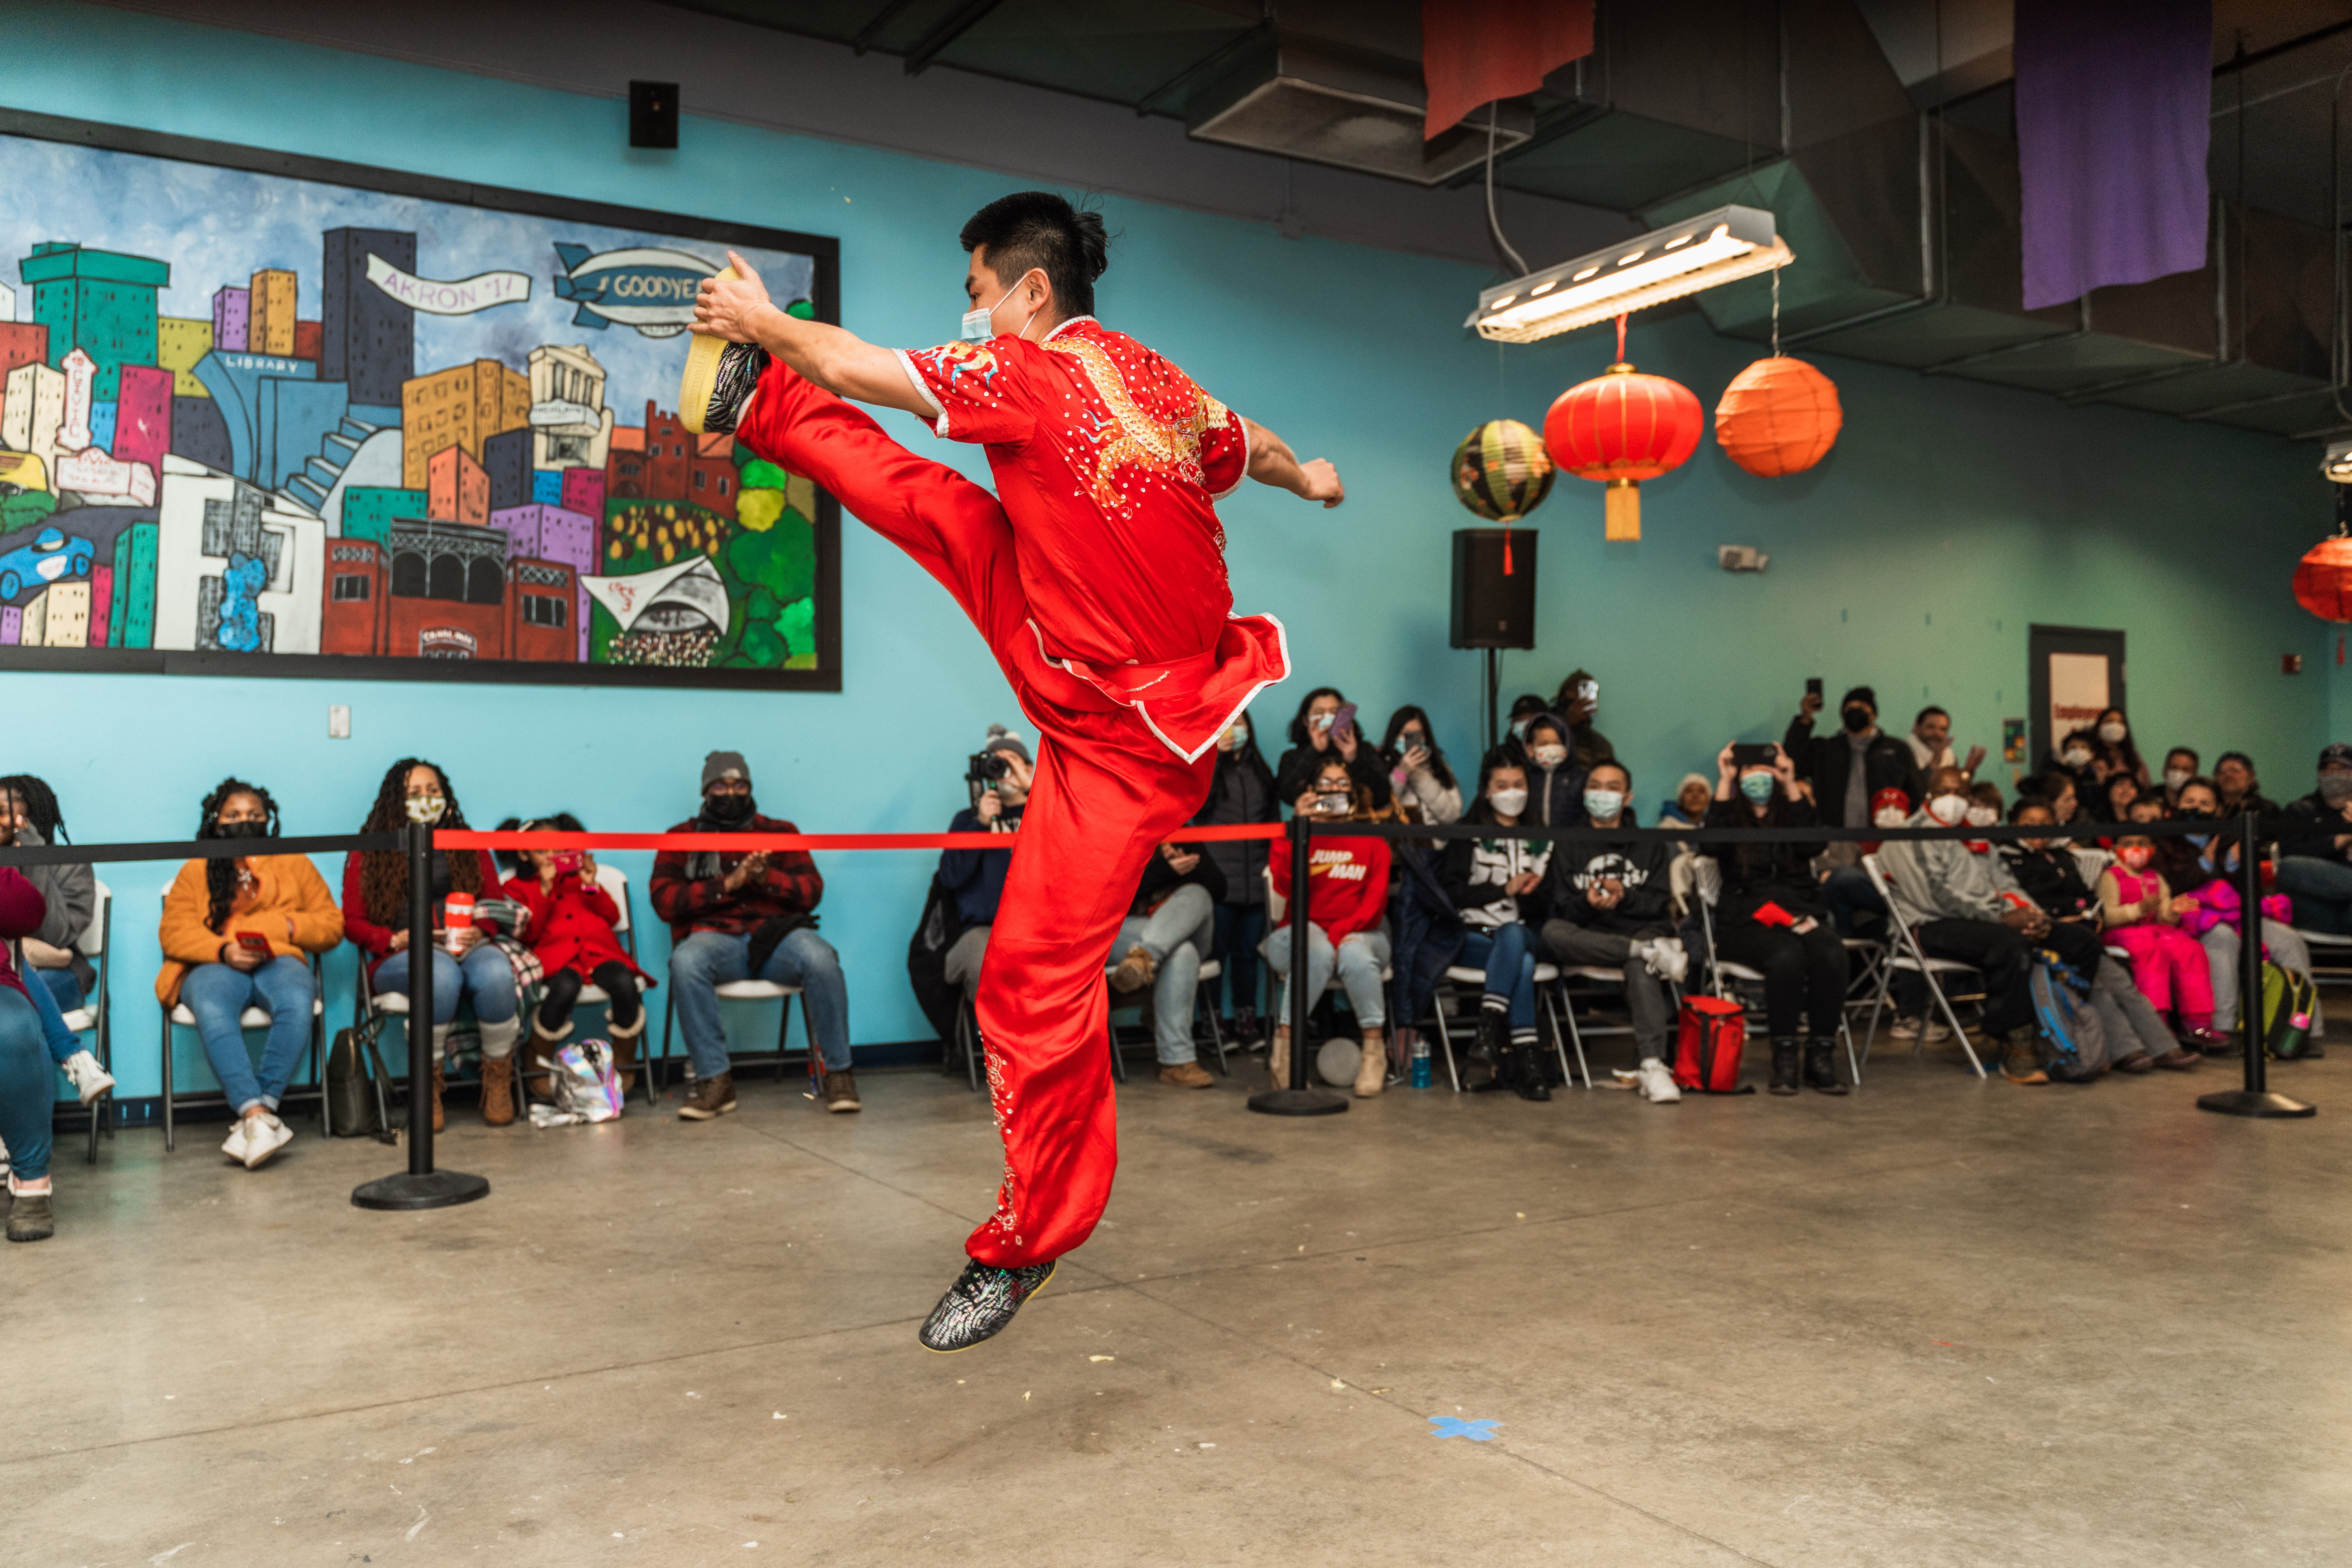 Kung Fu master dressed in red, leaping in the air during a martial arts routine